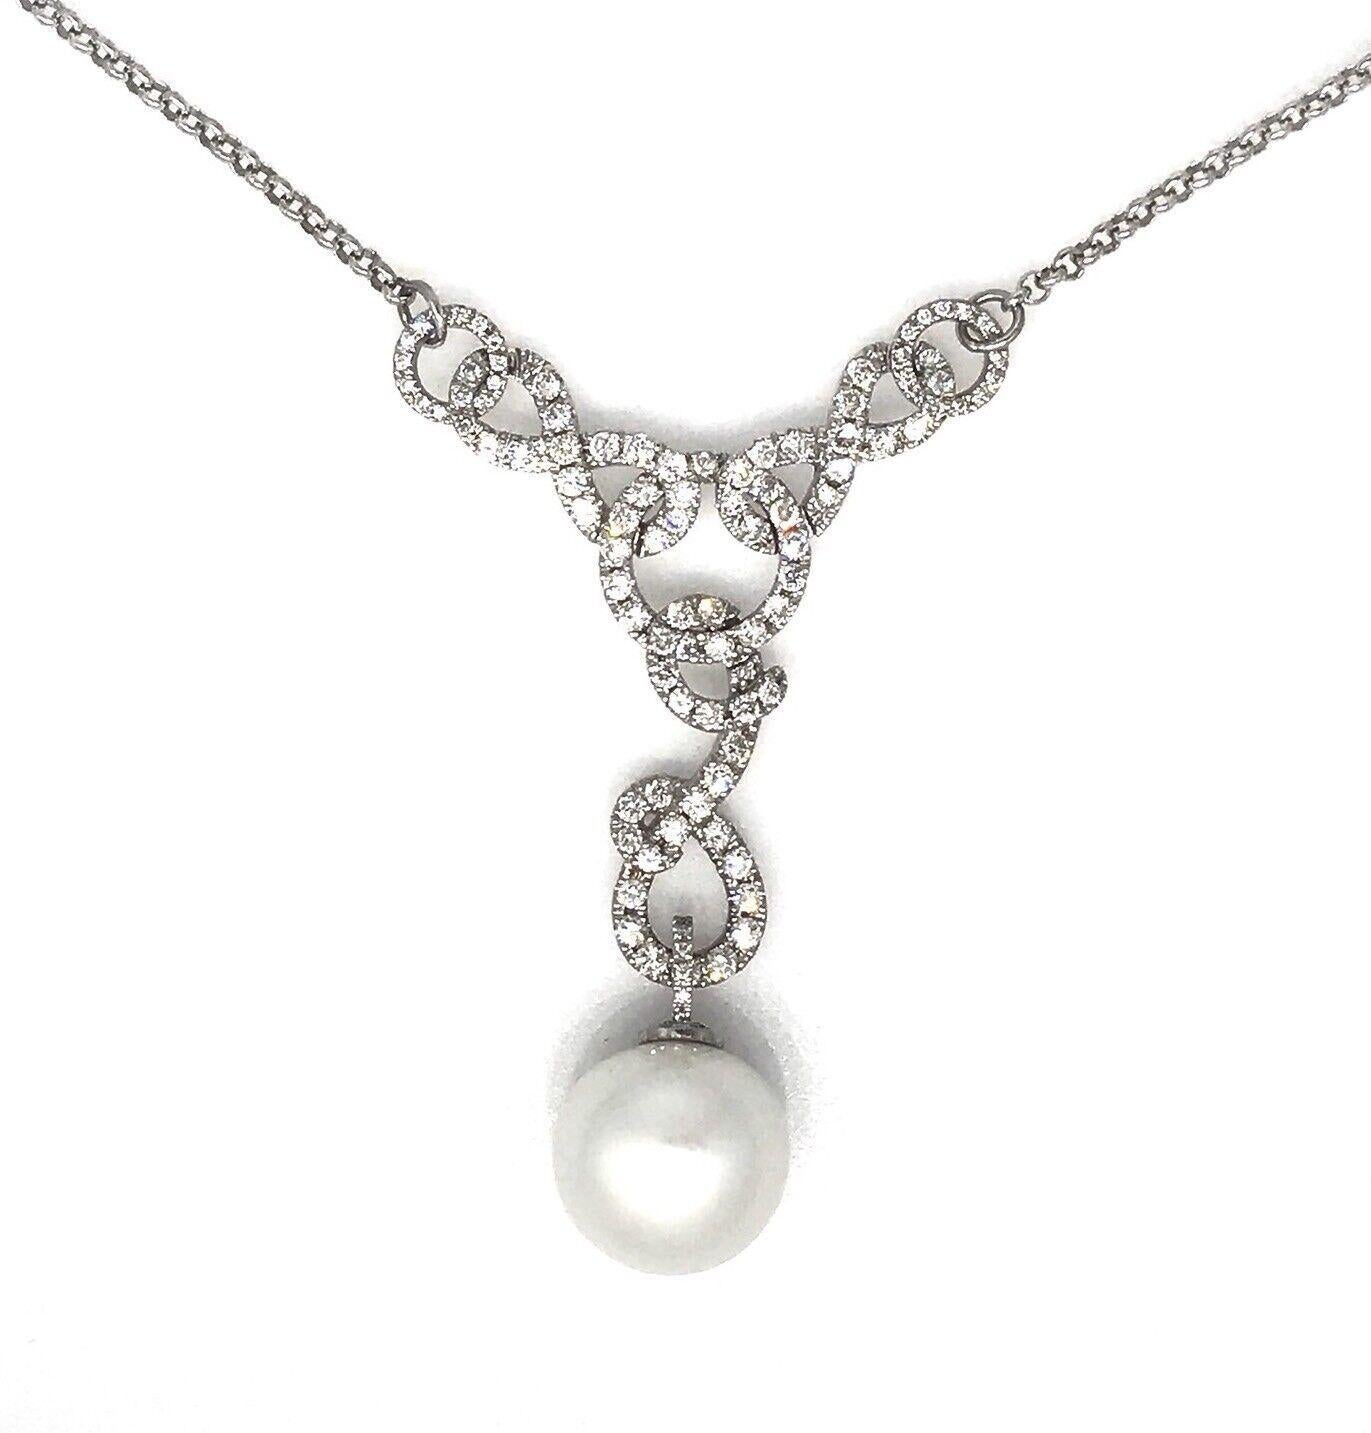 Diamond and South Sea Pearl Necklace Pendant in 18k White Gold

Diamond and Pearl Necklace features a White South Sea Pearl, 16mm in diameter, dangling from the bottom of a Swirled Diamond Pendant with Round Brilliant cut Diamonds Pavé set in 18k